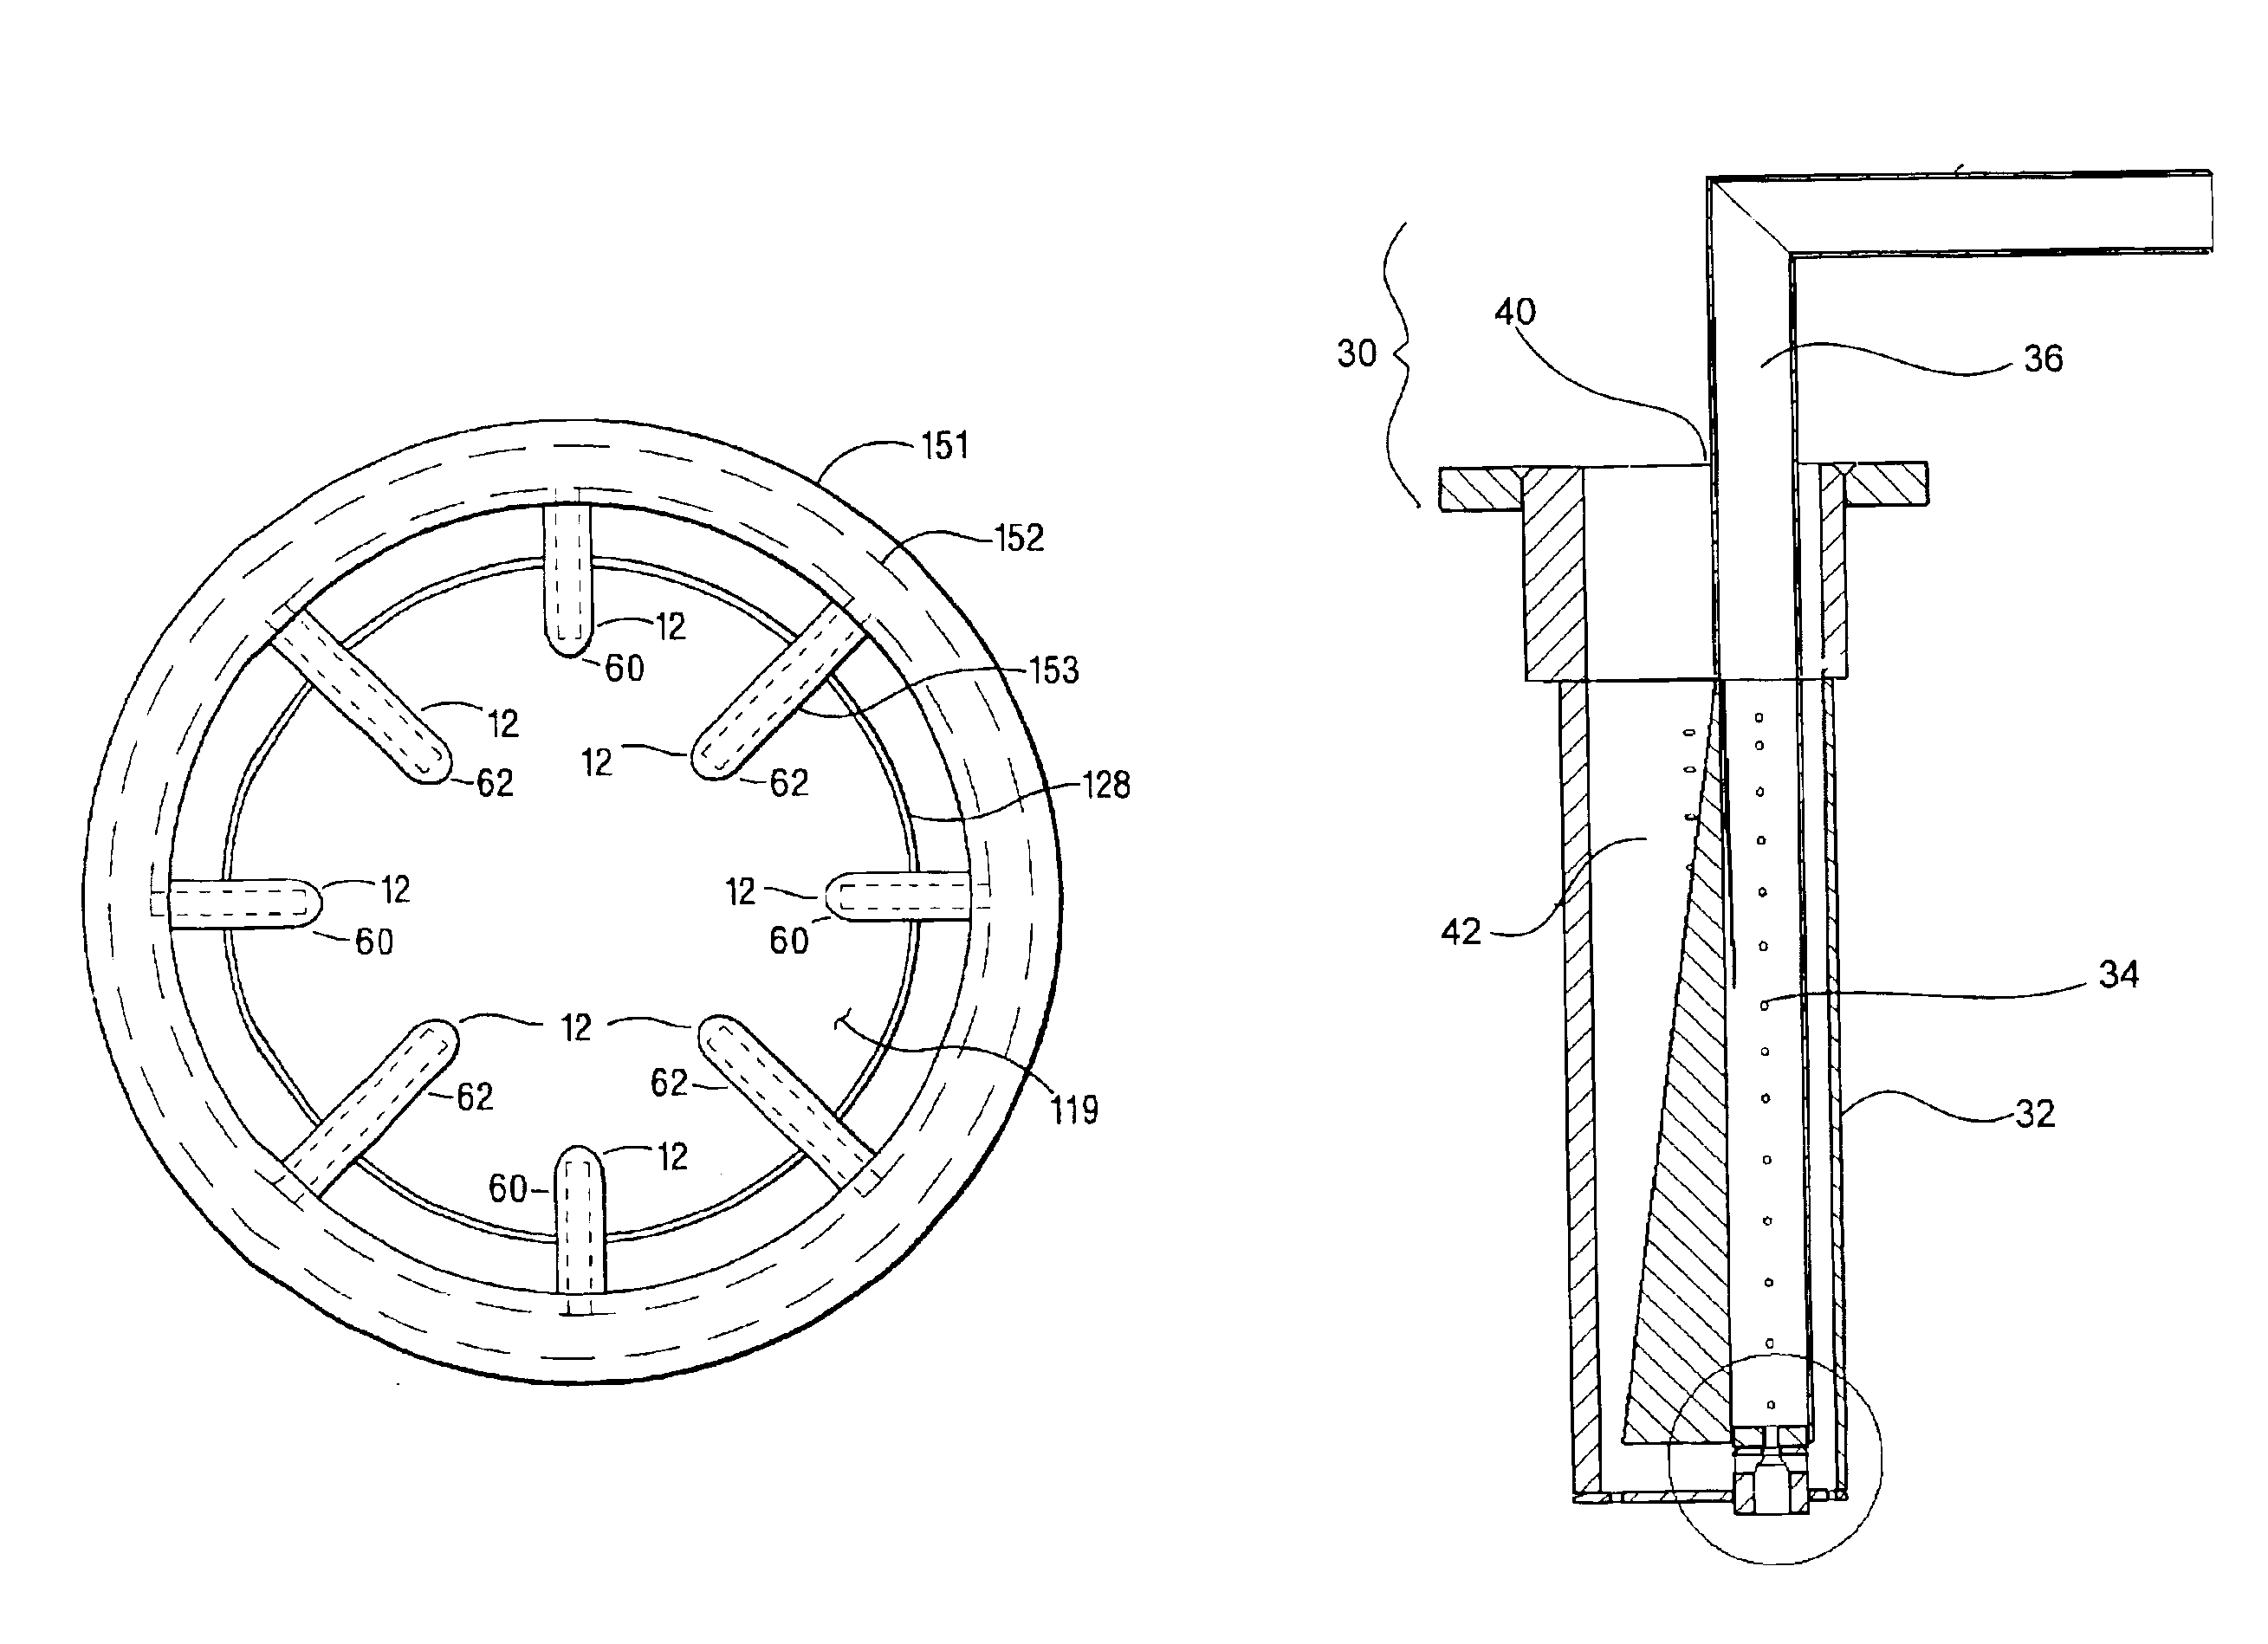 Turbine containing system and an injector therefor